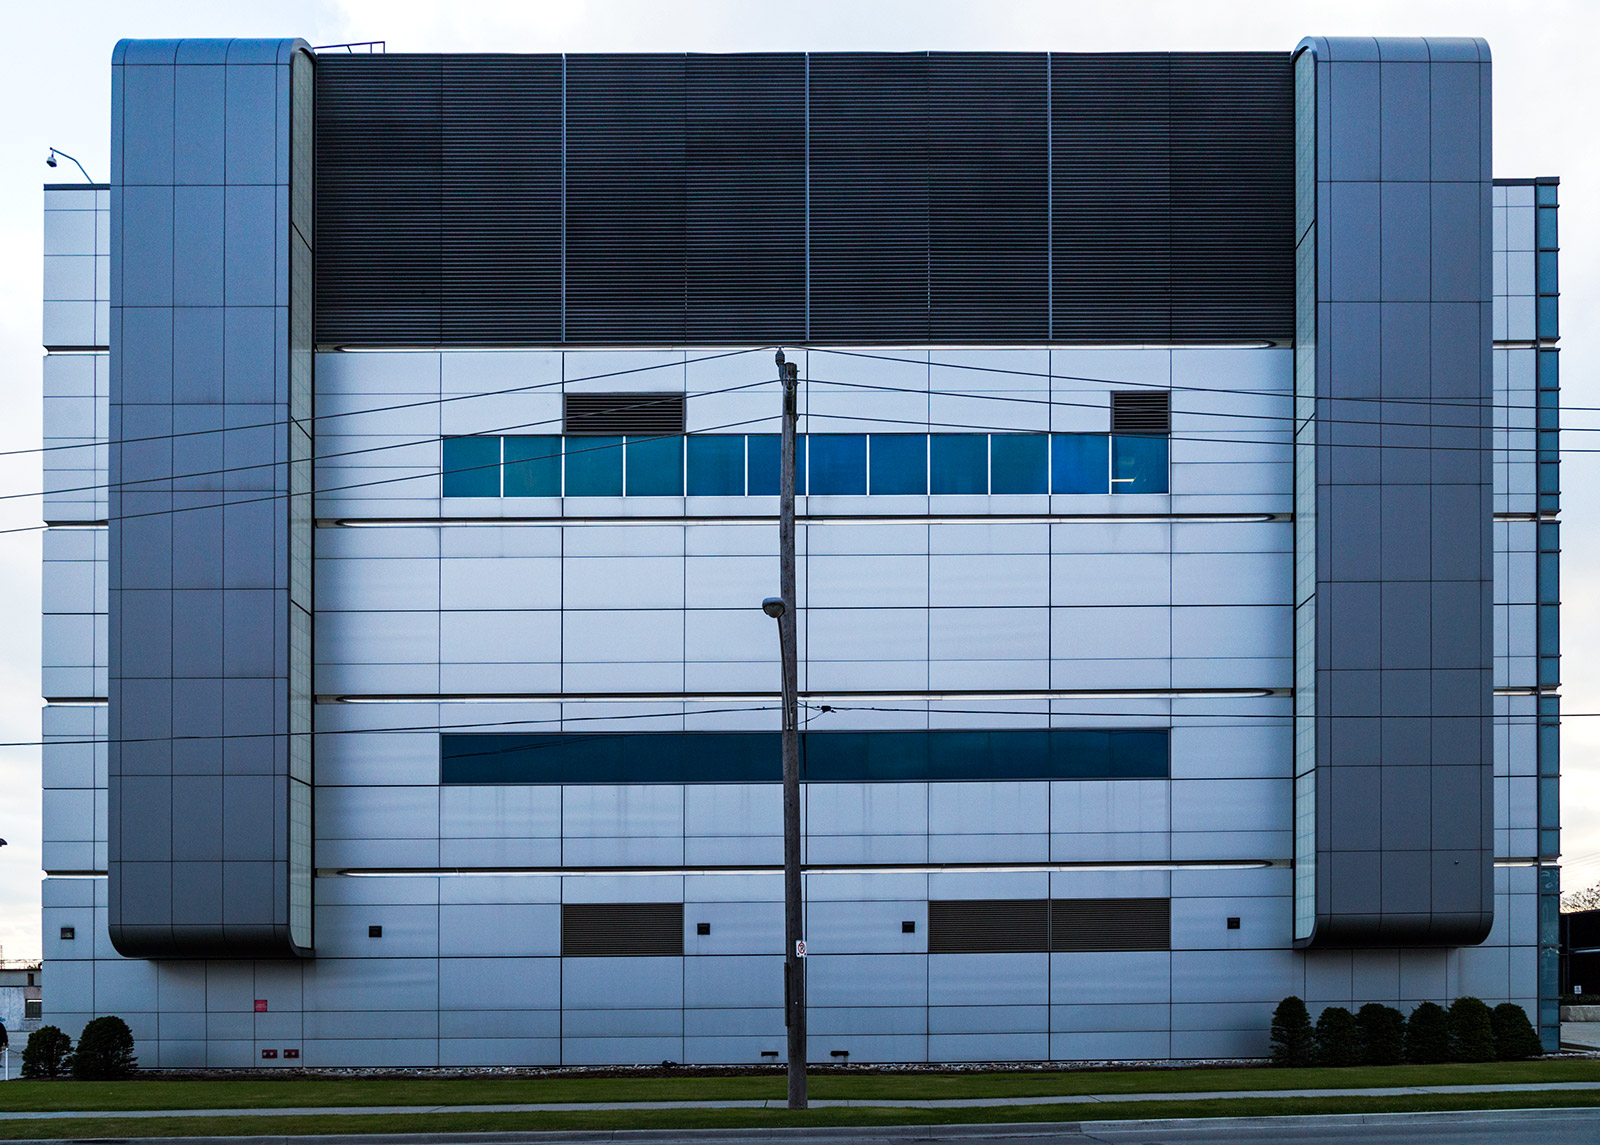 20141115.The Telus Laird Data Centre north elevation at dusk (Le